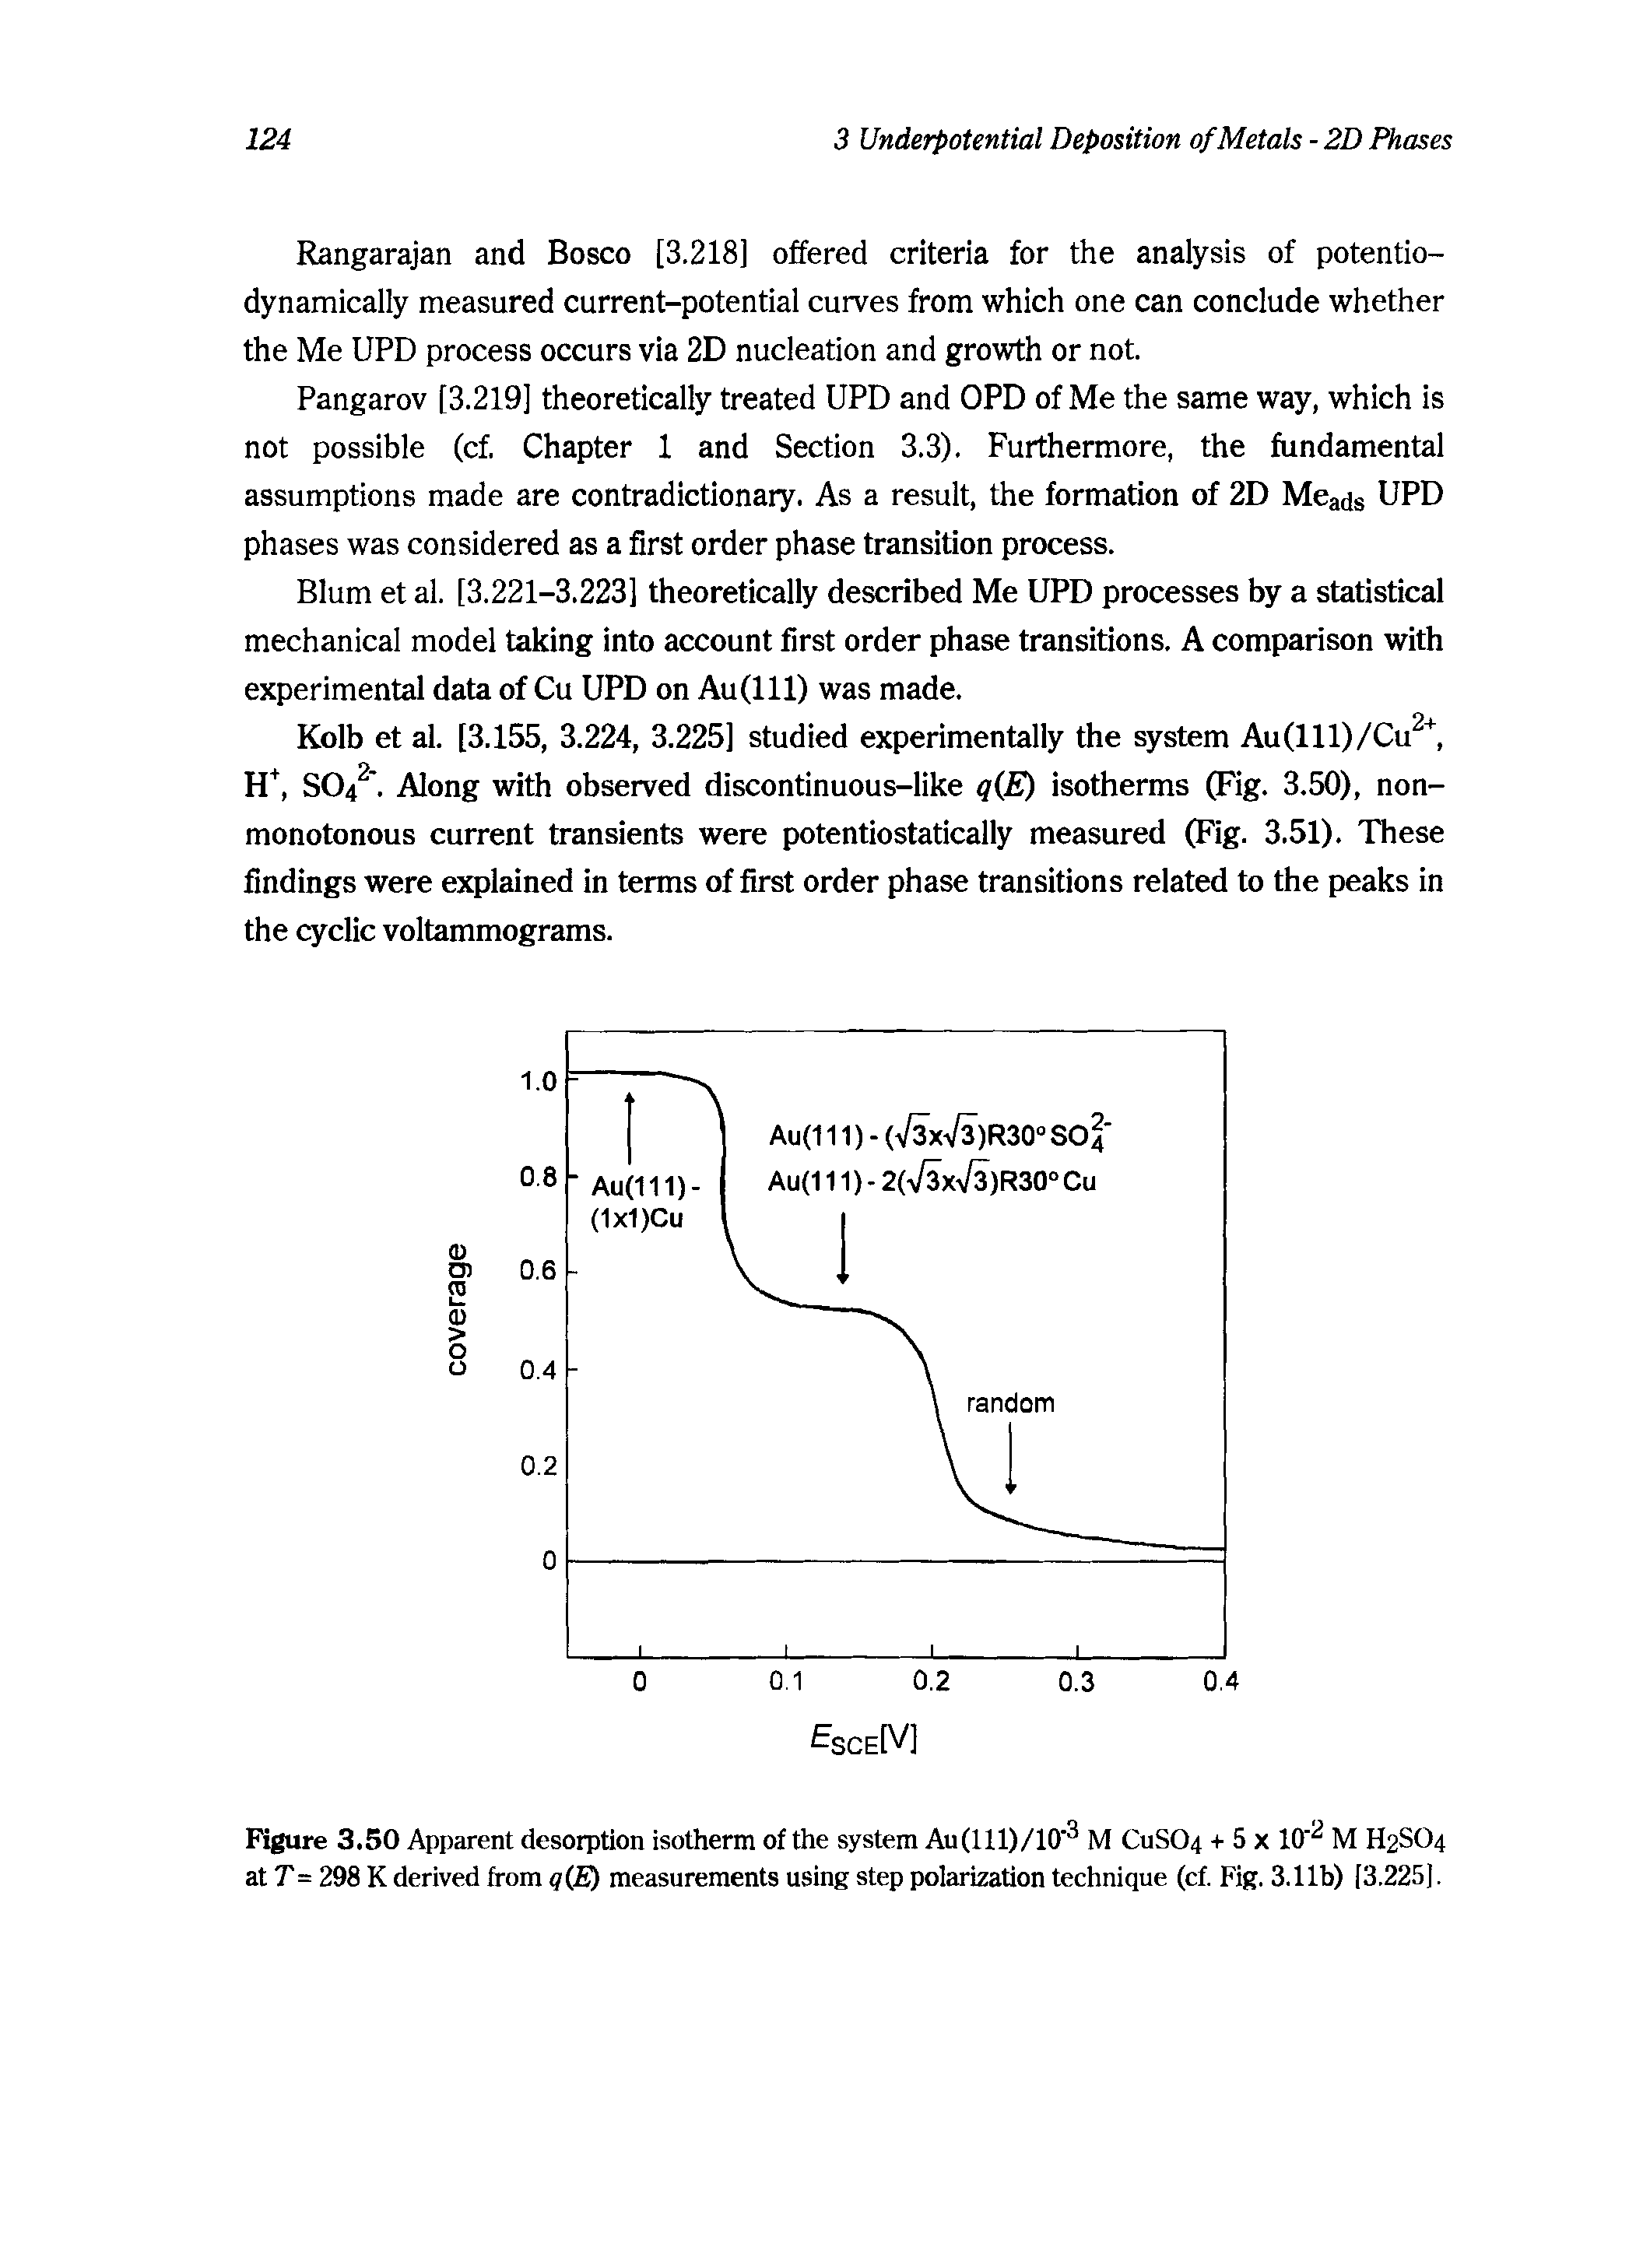 Figure 3.50 Apparent desorption isotherm of the system Au(lll)/10 M CuSOd + 5 x 10 M H2SO4 at T= 298 K derived from q(p ) measurements using step polarization technique (cf. Fig. 3.11b) [3.225],...